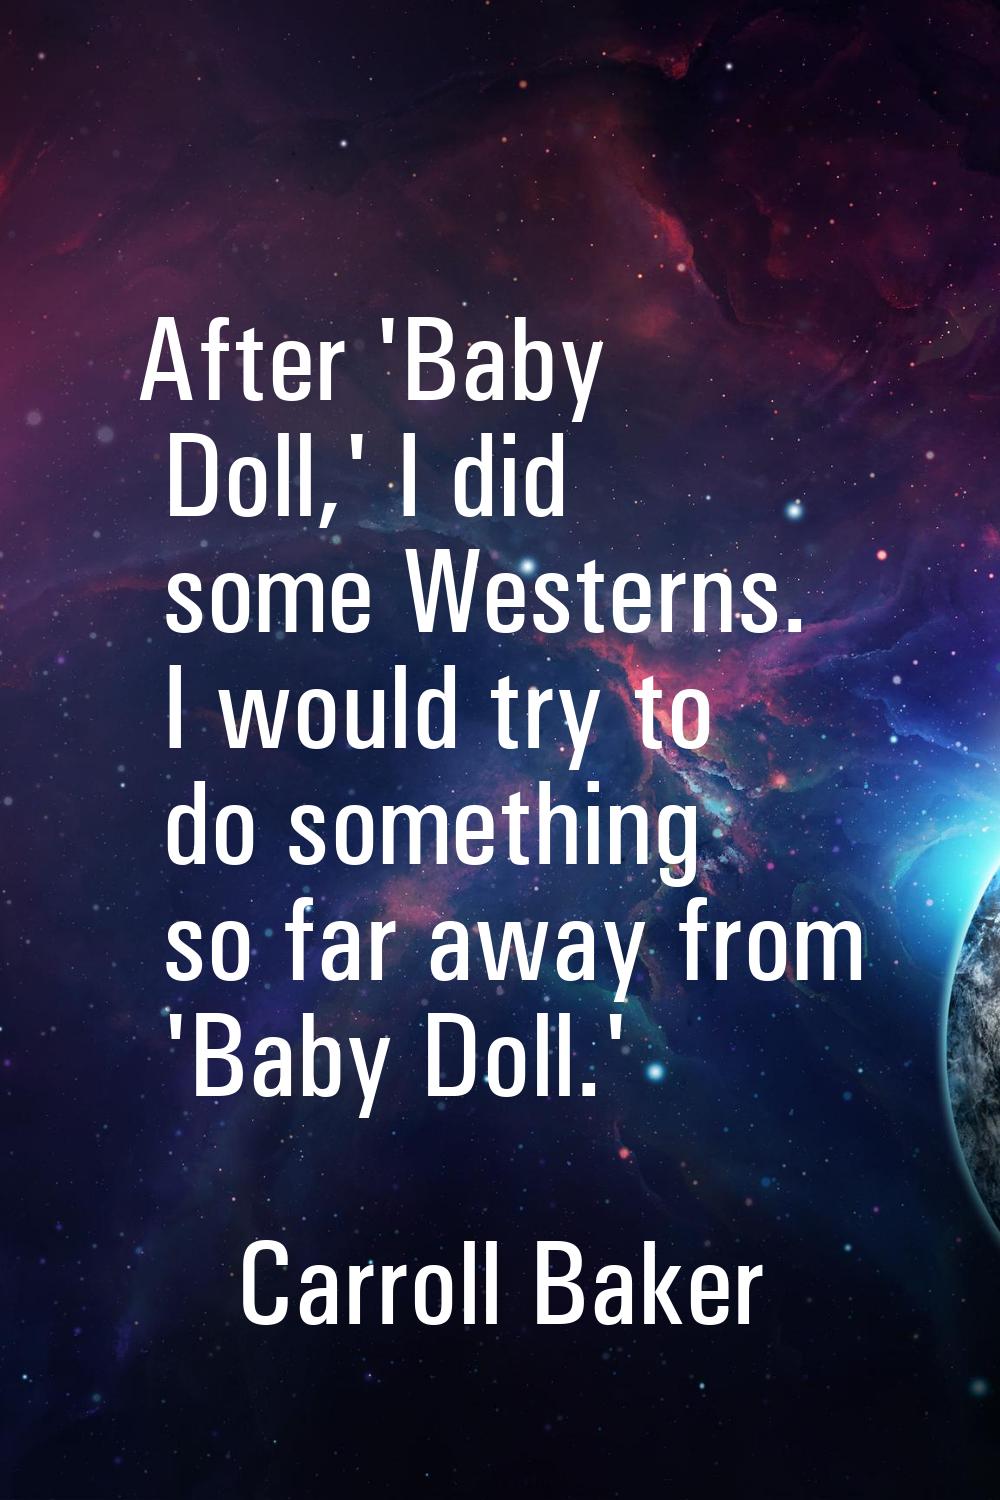 After 'Baby Doll,' I did some Westerns. I would try to do something so far away from 'Baby Doll.'